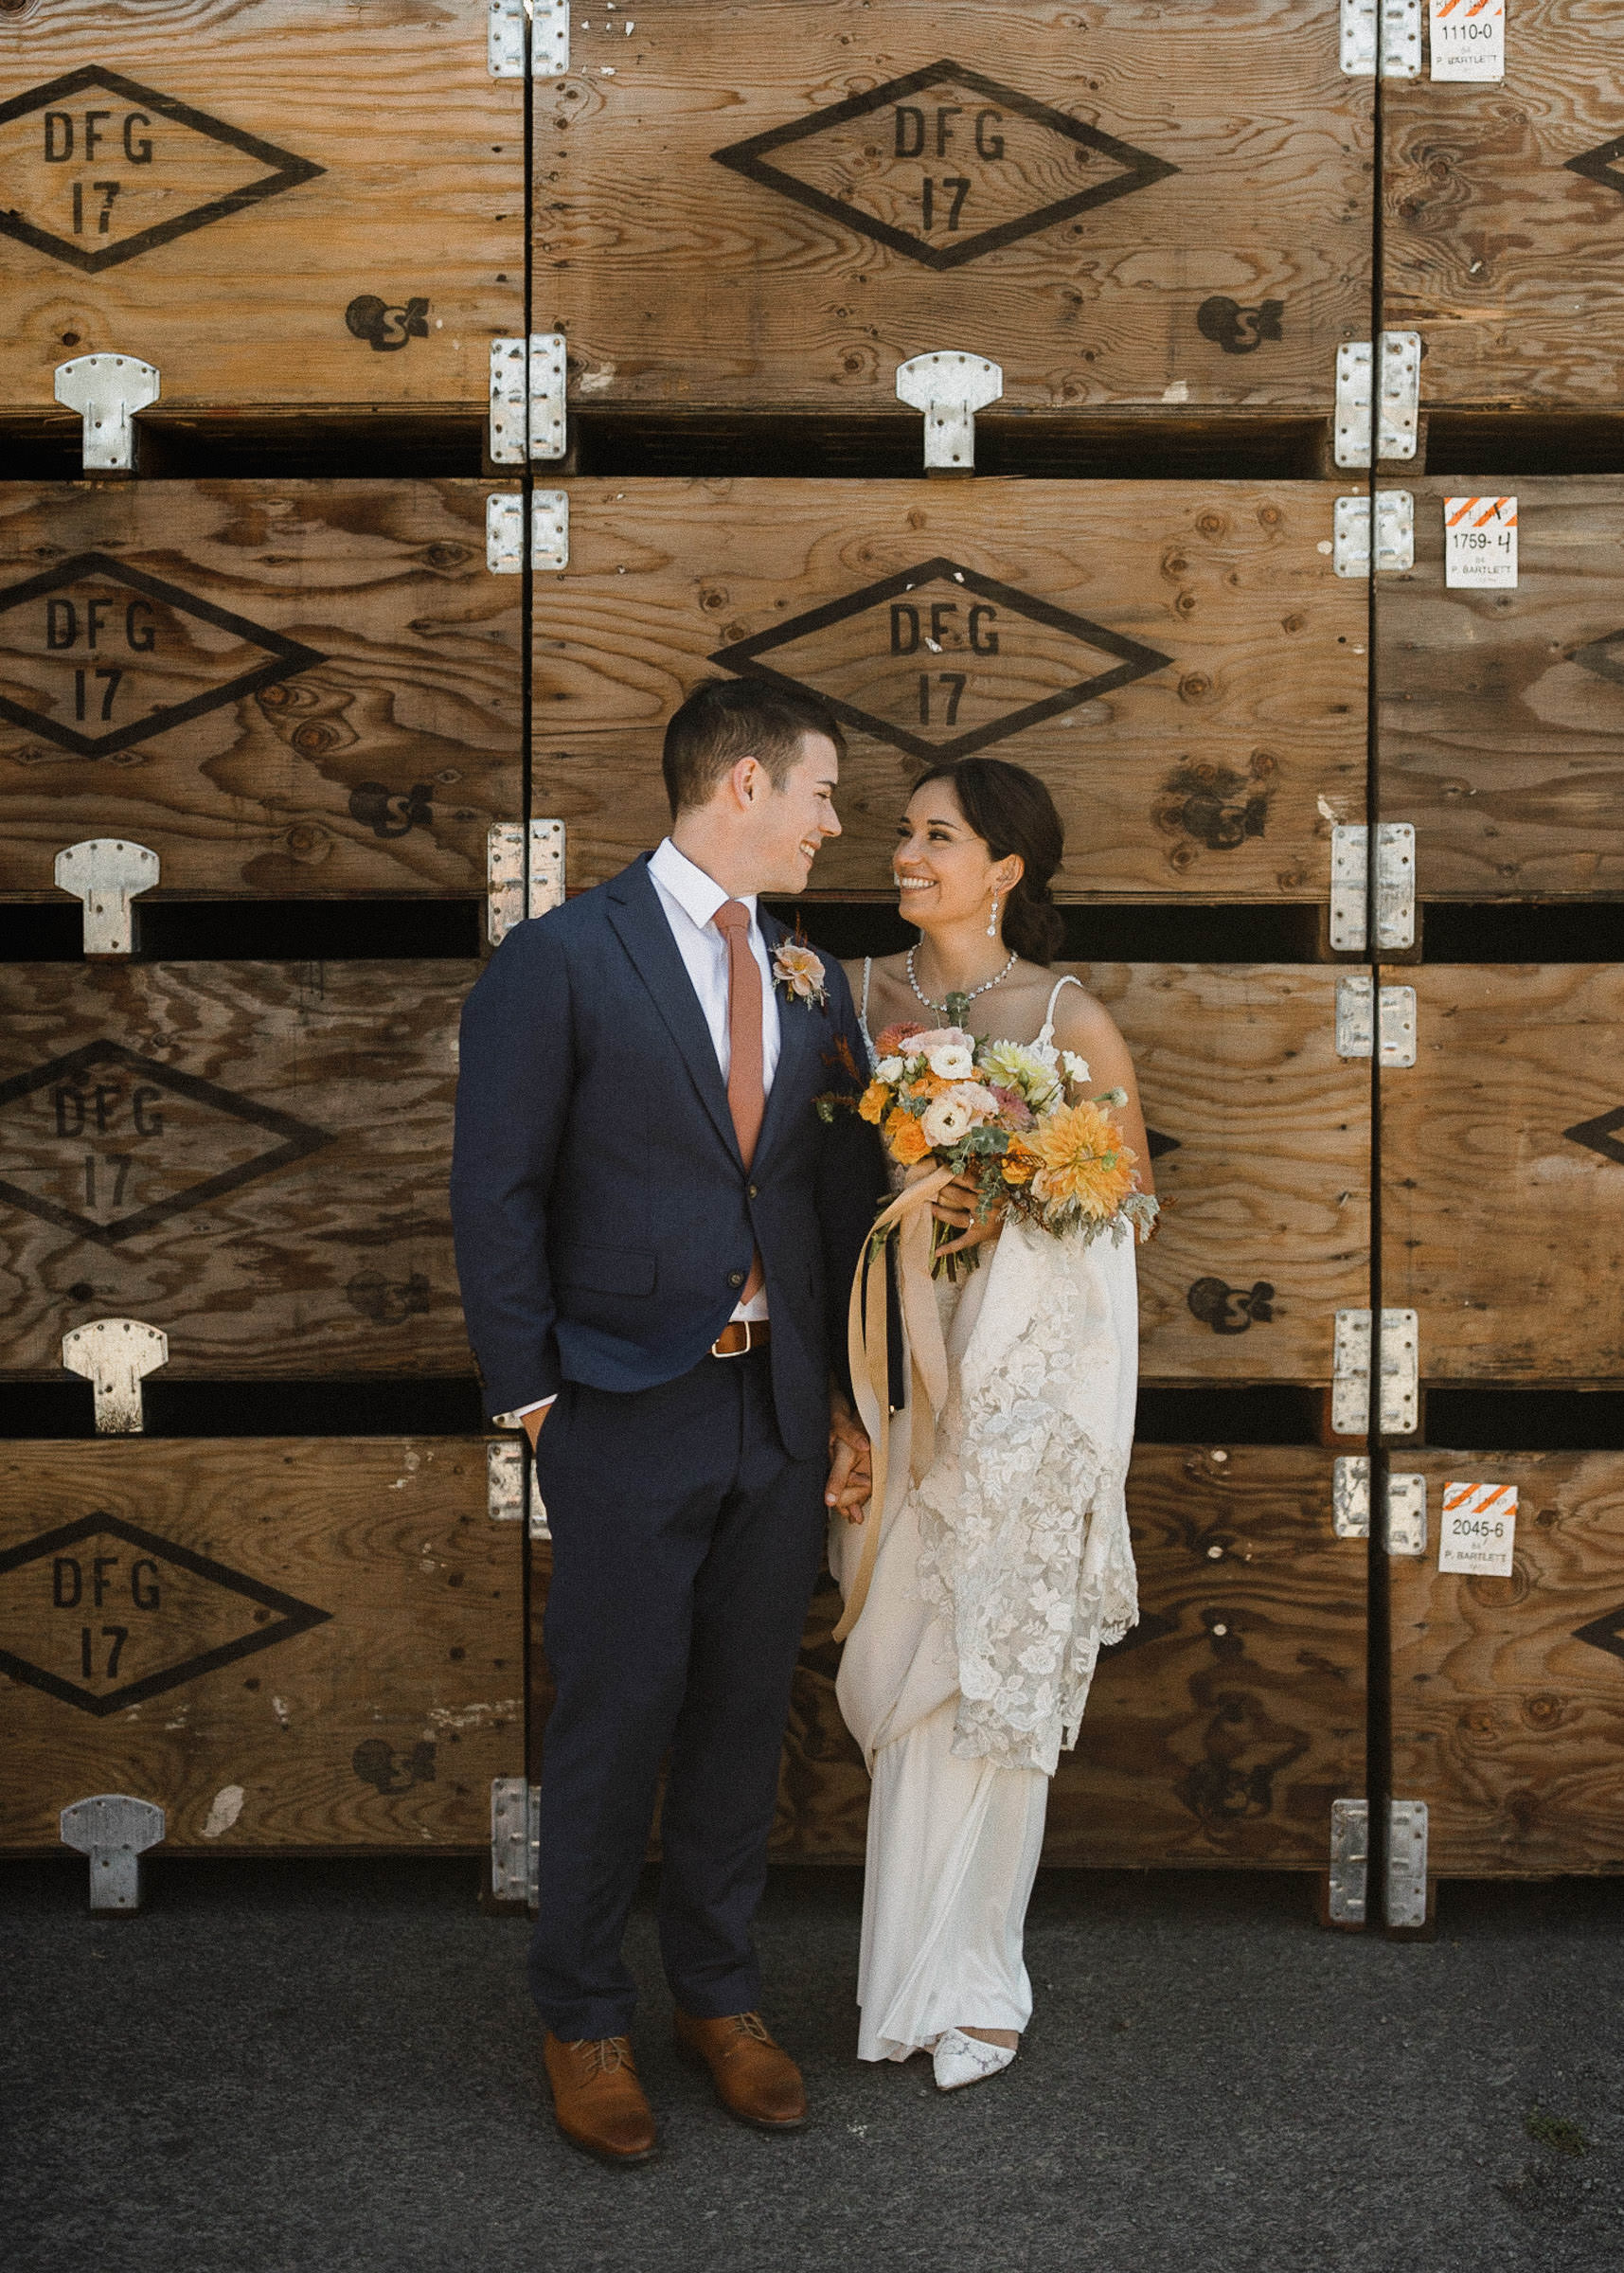 Bride and groom smiling, looking at each other in front of orchard crates